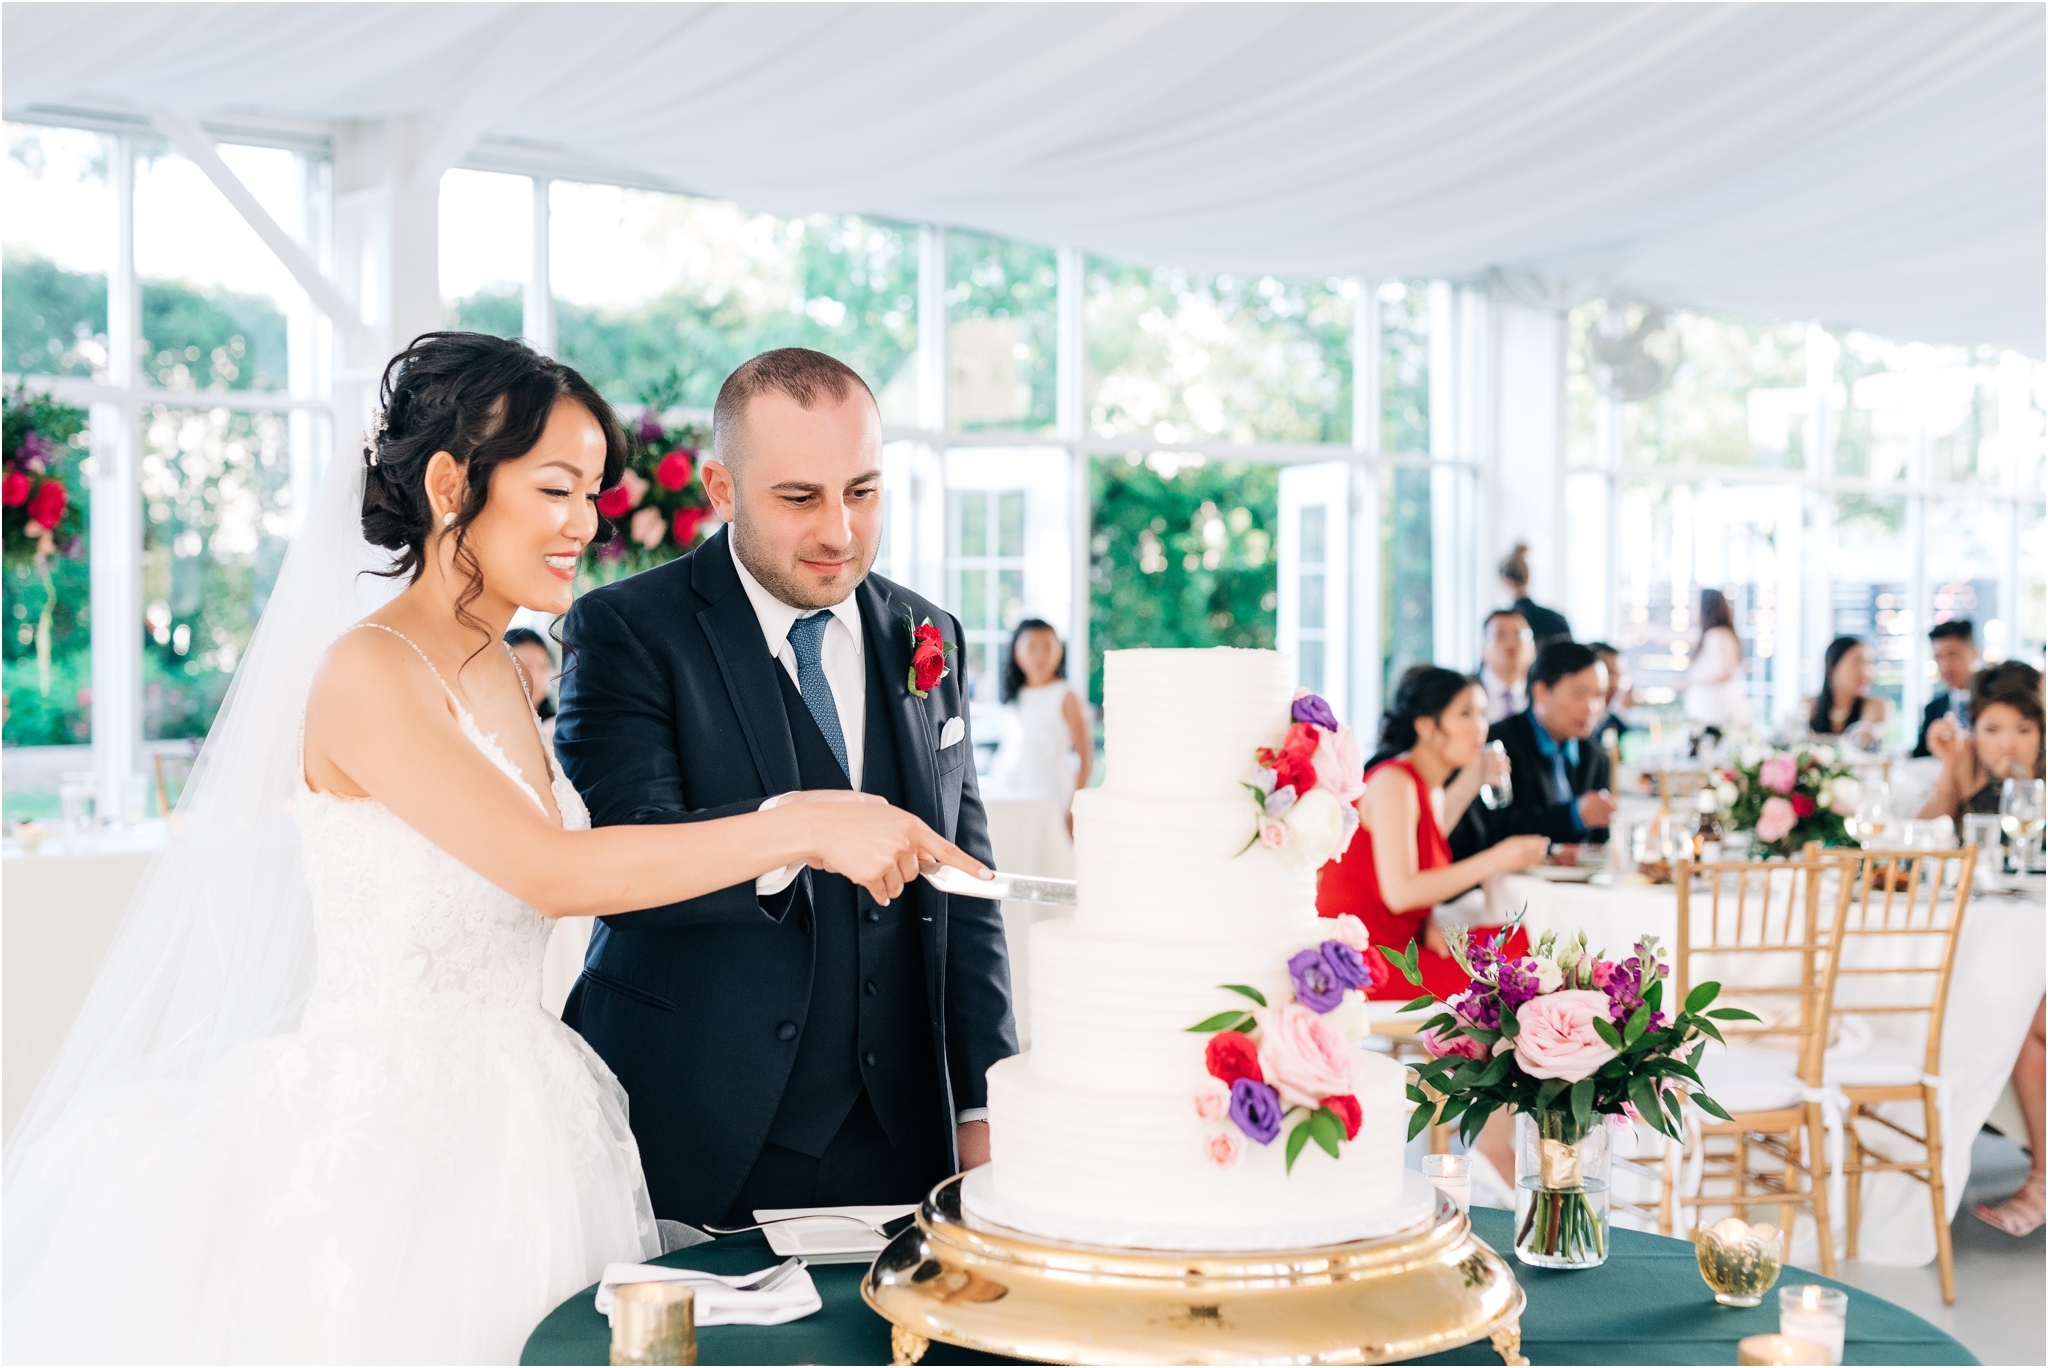 Cutting the cake in the pavilion